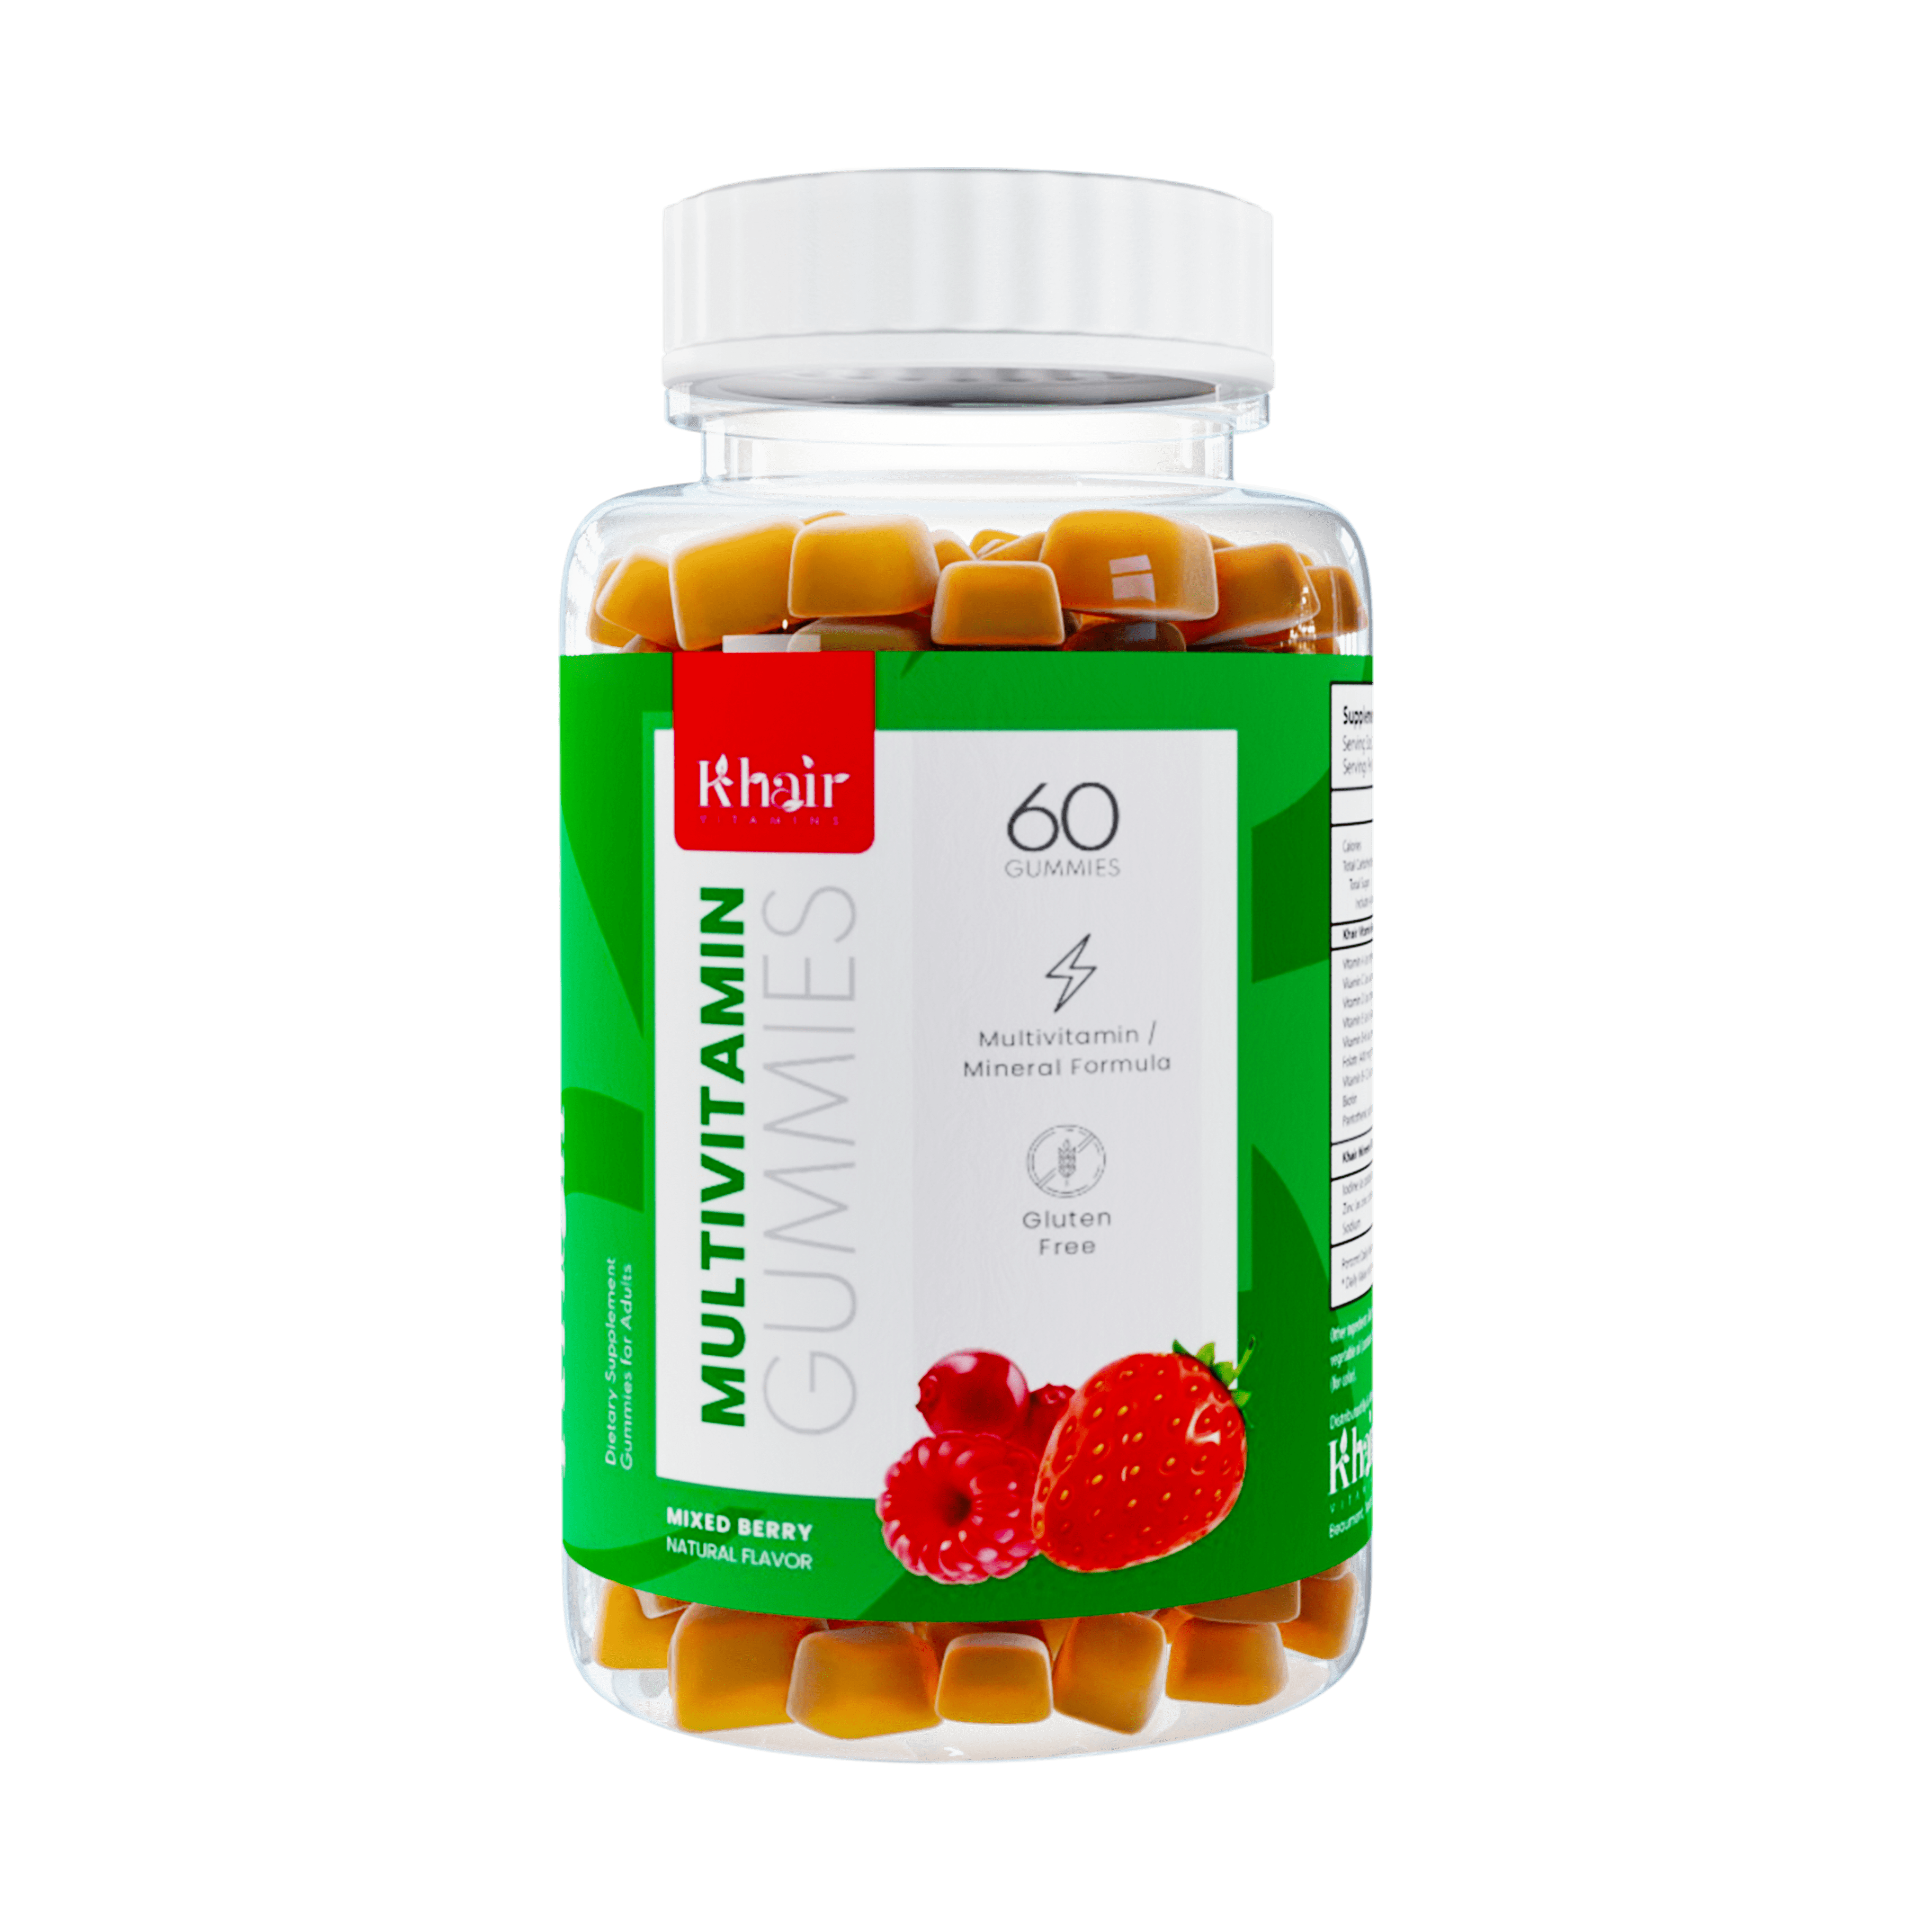 A bottle of vitamin gummies. Get your daily dose of health and savings in one delicious package.